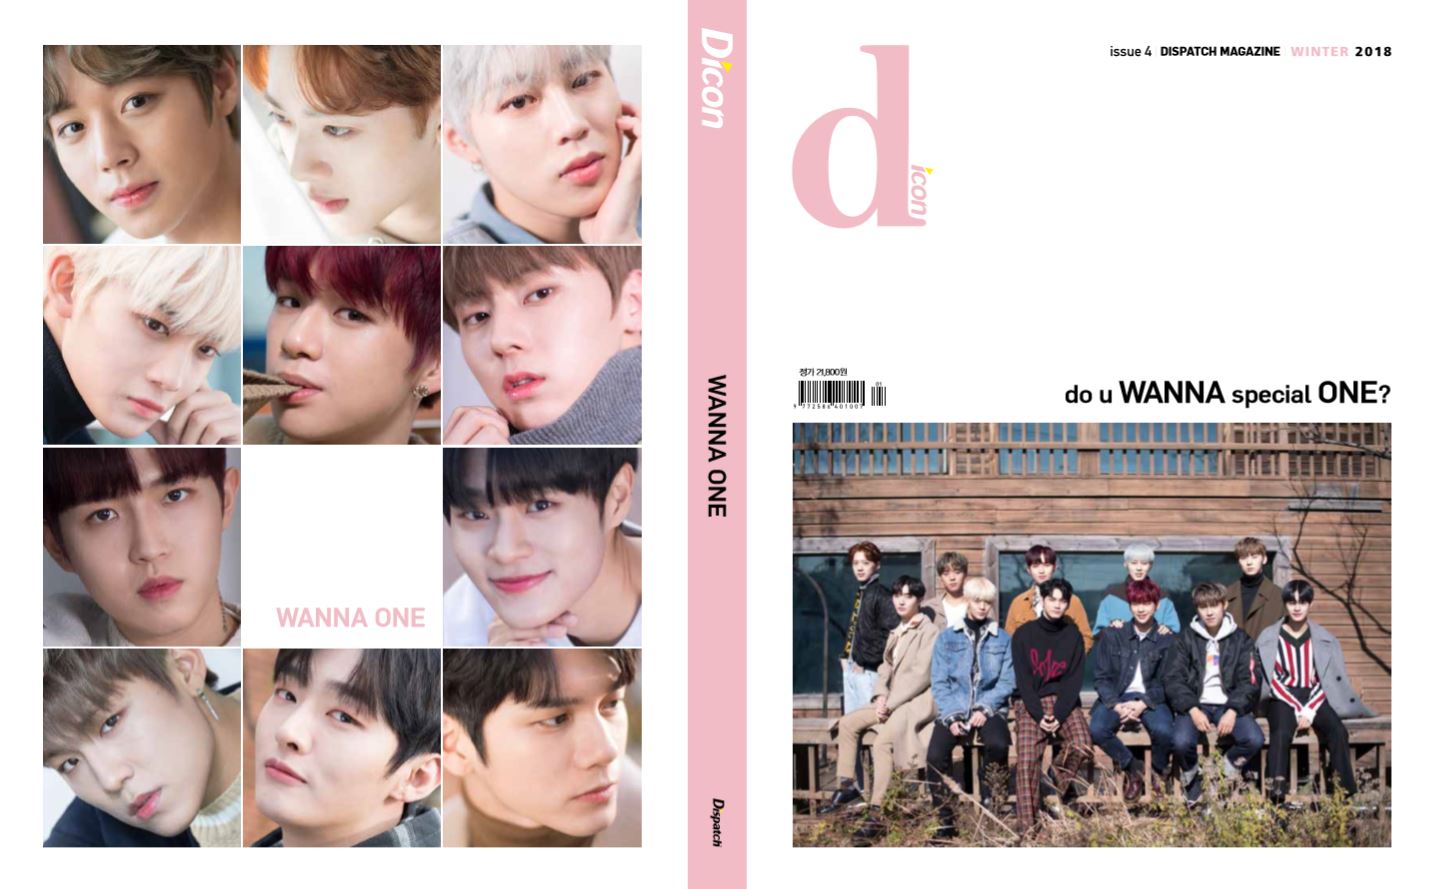 Photomagazine Dicon begins booking sales for its fourth photo album, this time collecting special moments from Wanna One.DIKON opened its reservation sale of Diaicon vol. IV: Wanna One - do u WANNA special ONE? from 10 am on the 14th.The deadline is December 27 at 10 p.m.The picture is made up of 232 pages. We show Wanna Ones Christmas party concept pictorials. Pattaya Healing trips, high-definition HD photo.There is plenty to read, too: a variety of letters written by members themselves, post-its answering questions from Wannable, and drawings drawn directly.The appendix offers four types: First, you can choose one of 11 versions of the Banyangjang minibook by member. 64 pages, and another picture.The members handwriting was made with a letterbook. 12 photo cards. One group and one member. Finally, there is a photo sticker with a passport photo.The Diicorn is a self-produced photo magazine by , available for online reservations at Aladdin, Yes24, Interpark, and the Kyobo Book Centre.The release date is January 16, 2019.▲ Minibook Zhangye (Park Ji-hoon Ver.)▲ Handwritten letter Zhangye (Gang Daniel Ver.